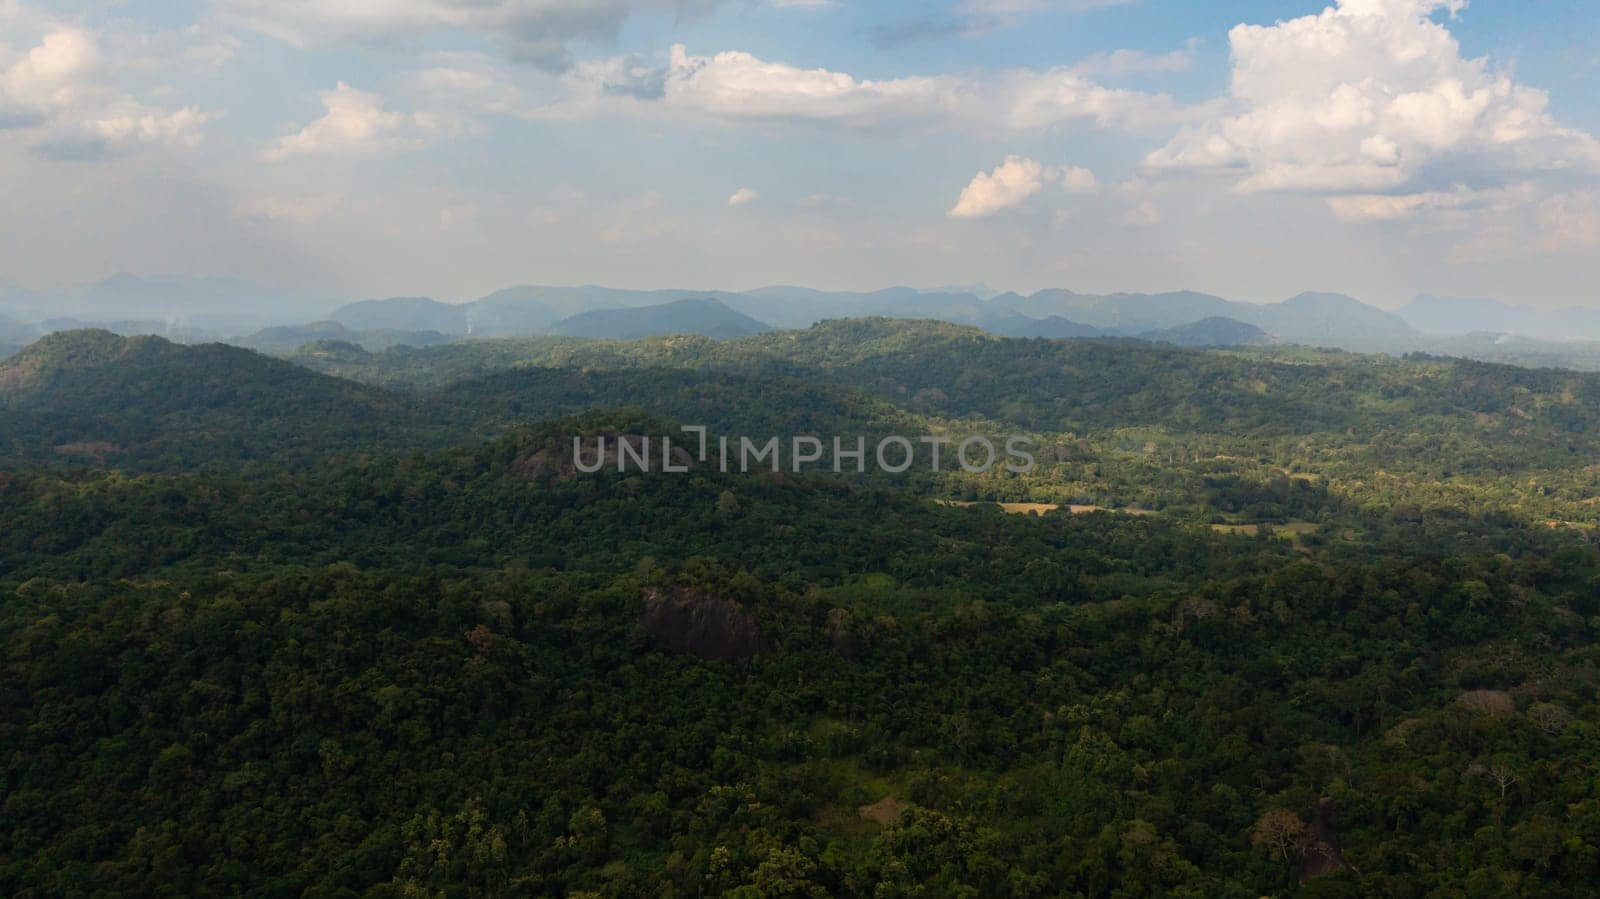 Aerial view of Mountains with rainforest and clouds. Sri Lanka.